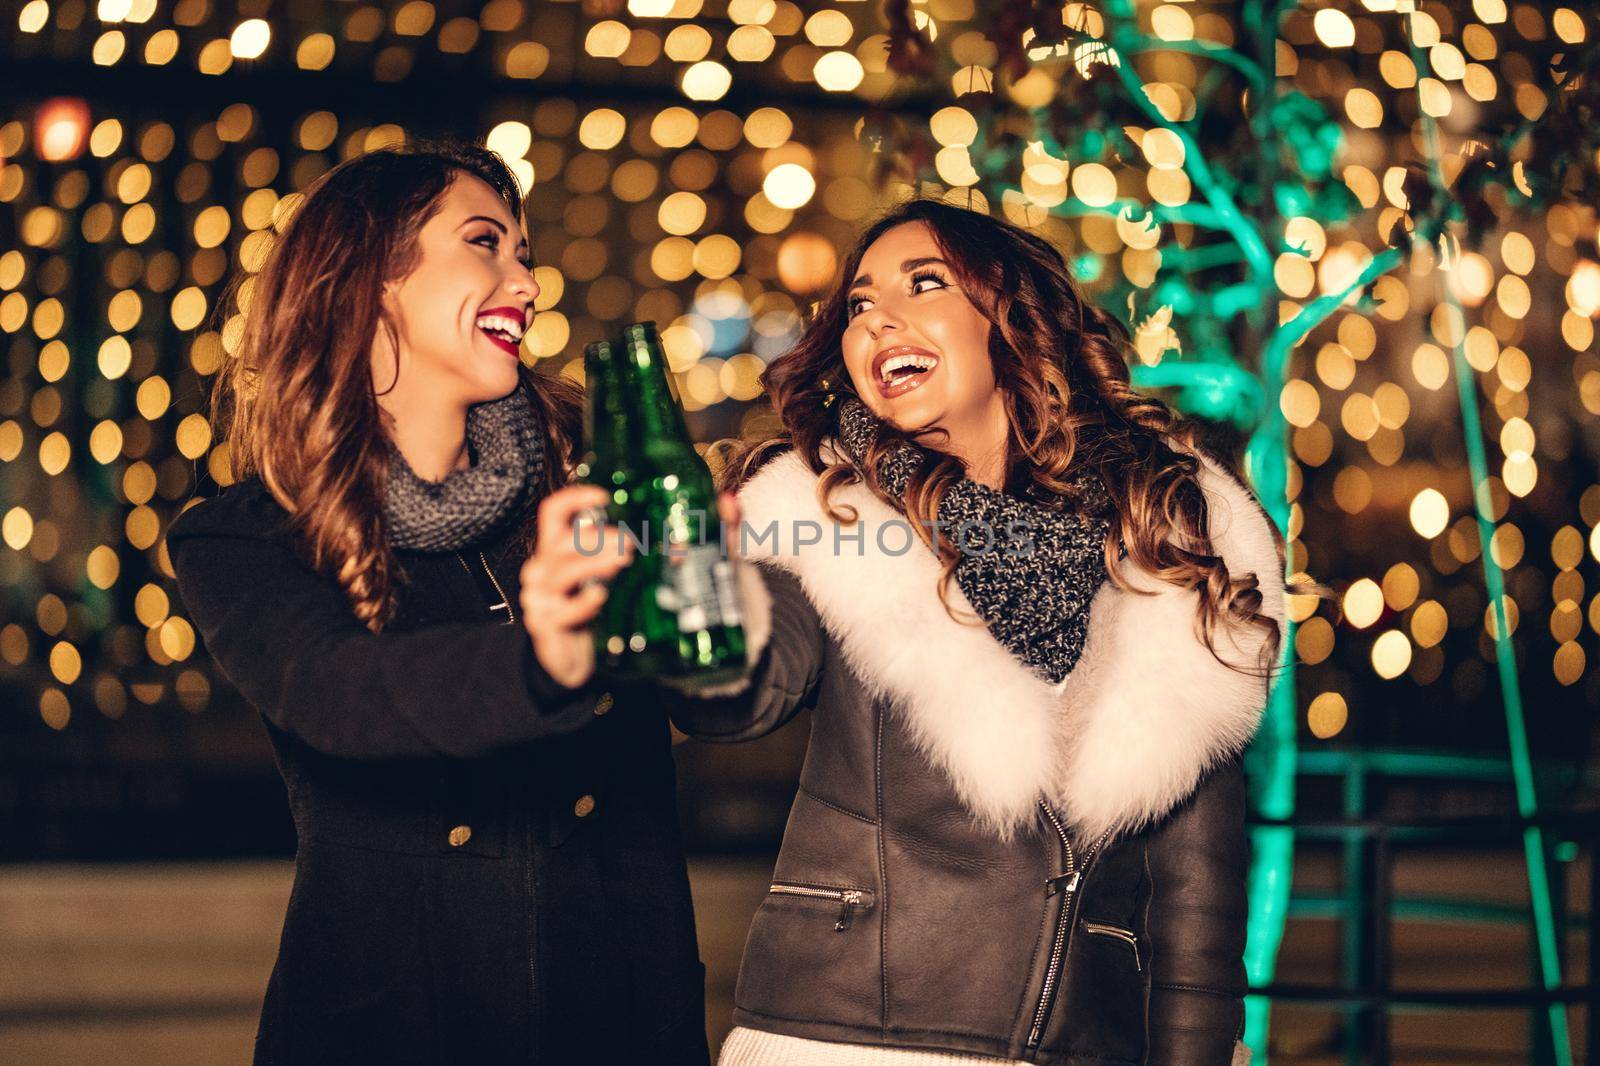 Two female friends enjoy the night out, looking each other and laughing with bottles of beer in their hands.